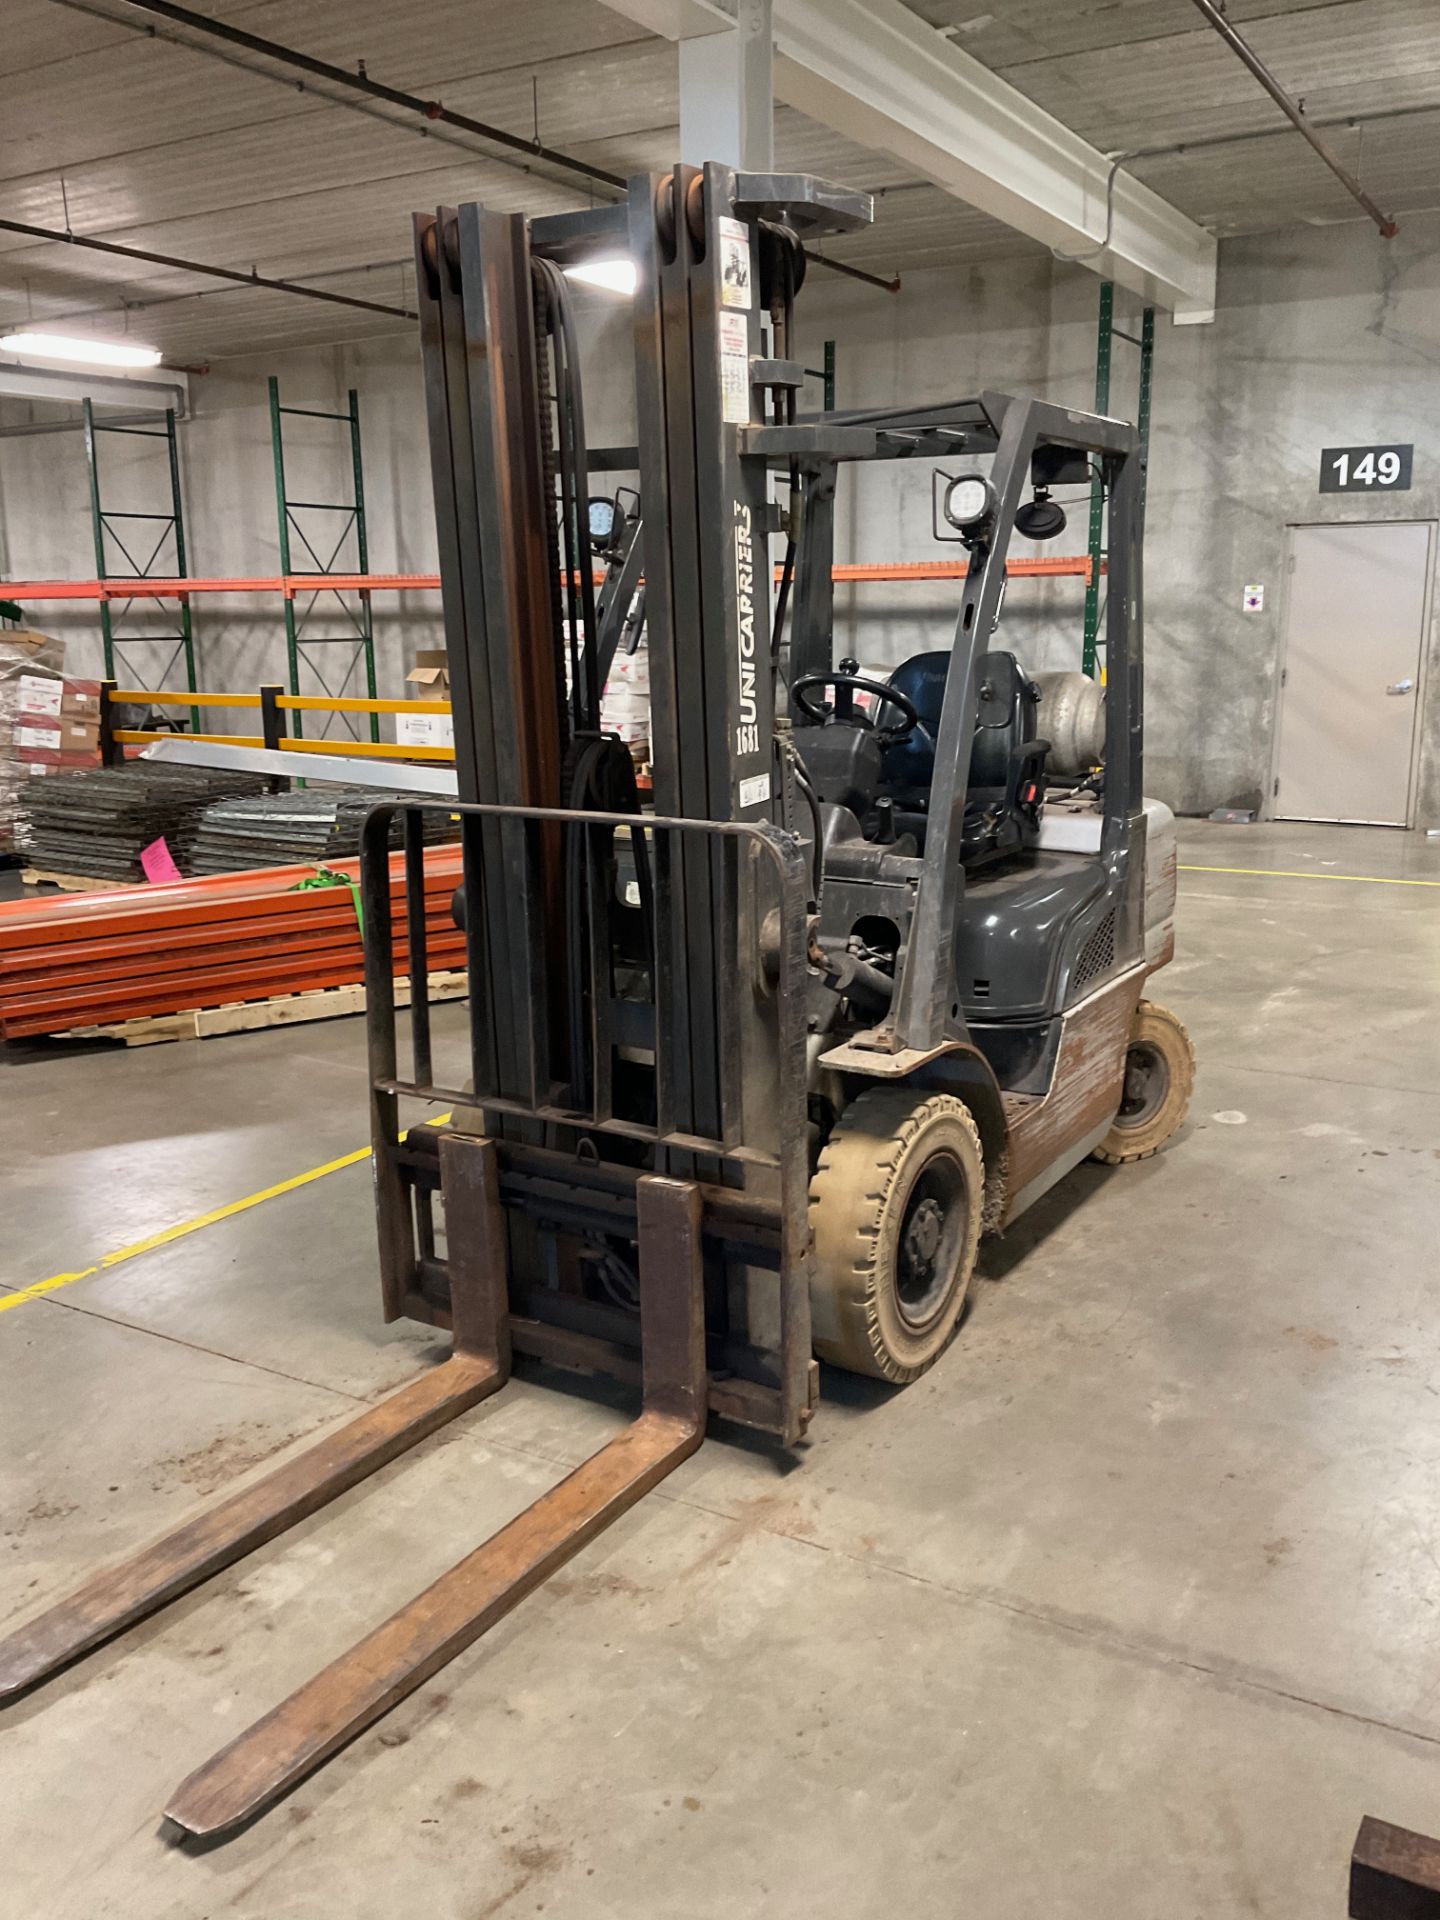 Unicarriers Model MP1F2A25LV Lift Truck, Side Shift, 3100 LB Max Ca (Not Operational) | Rig Fee $150 - Image 3 of 5